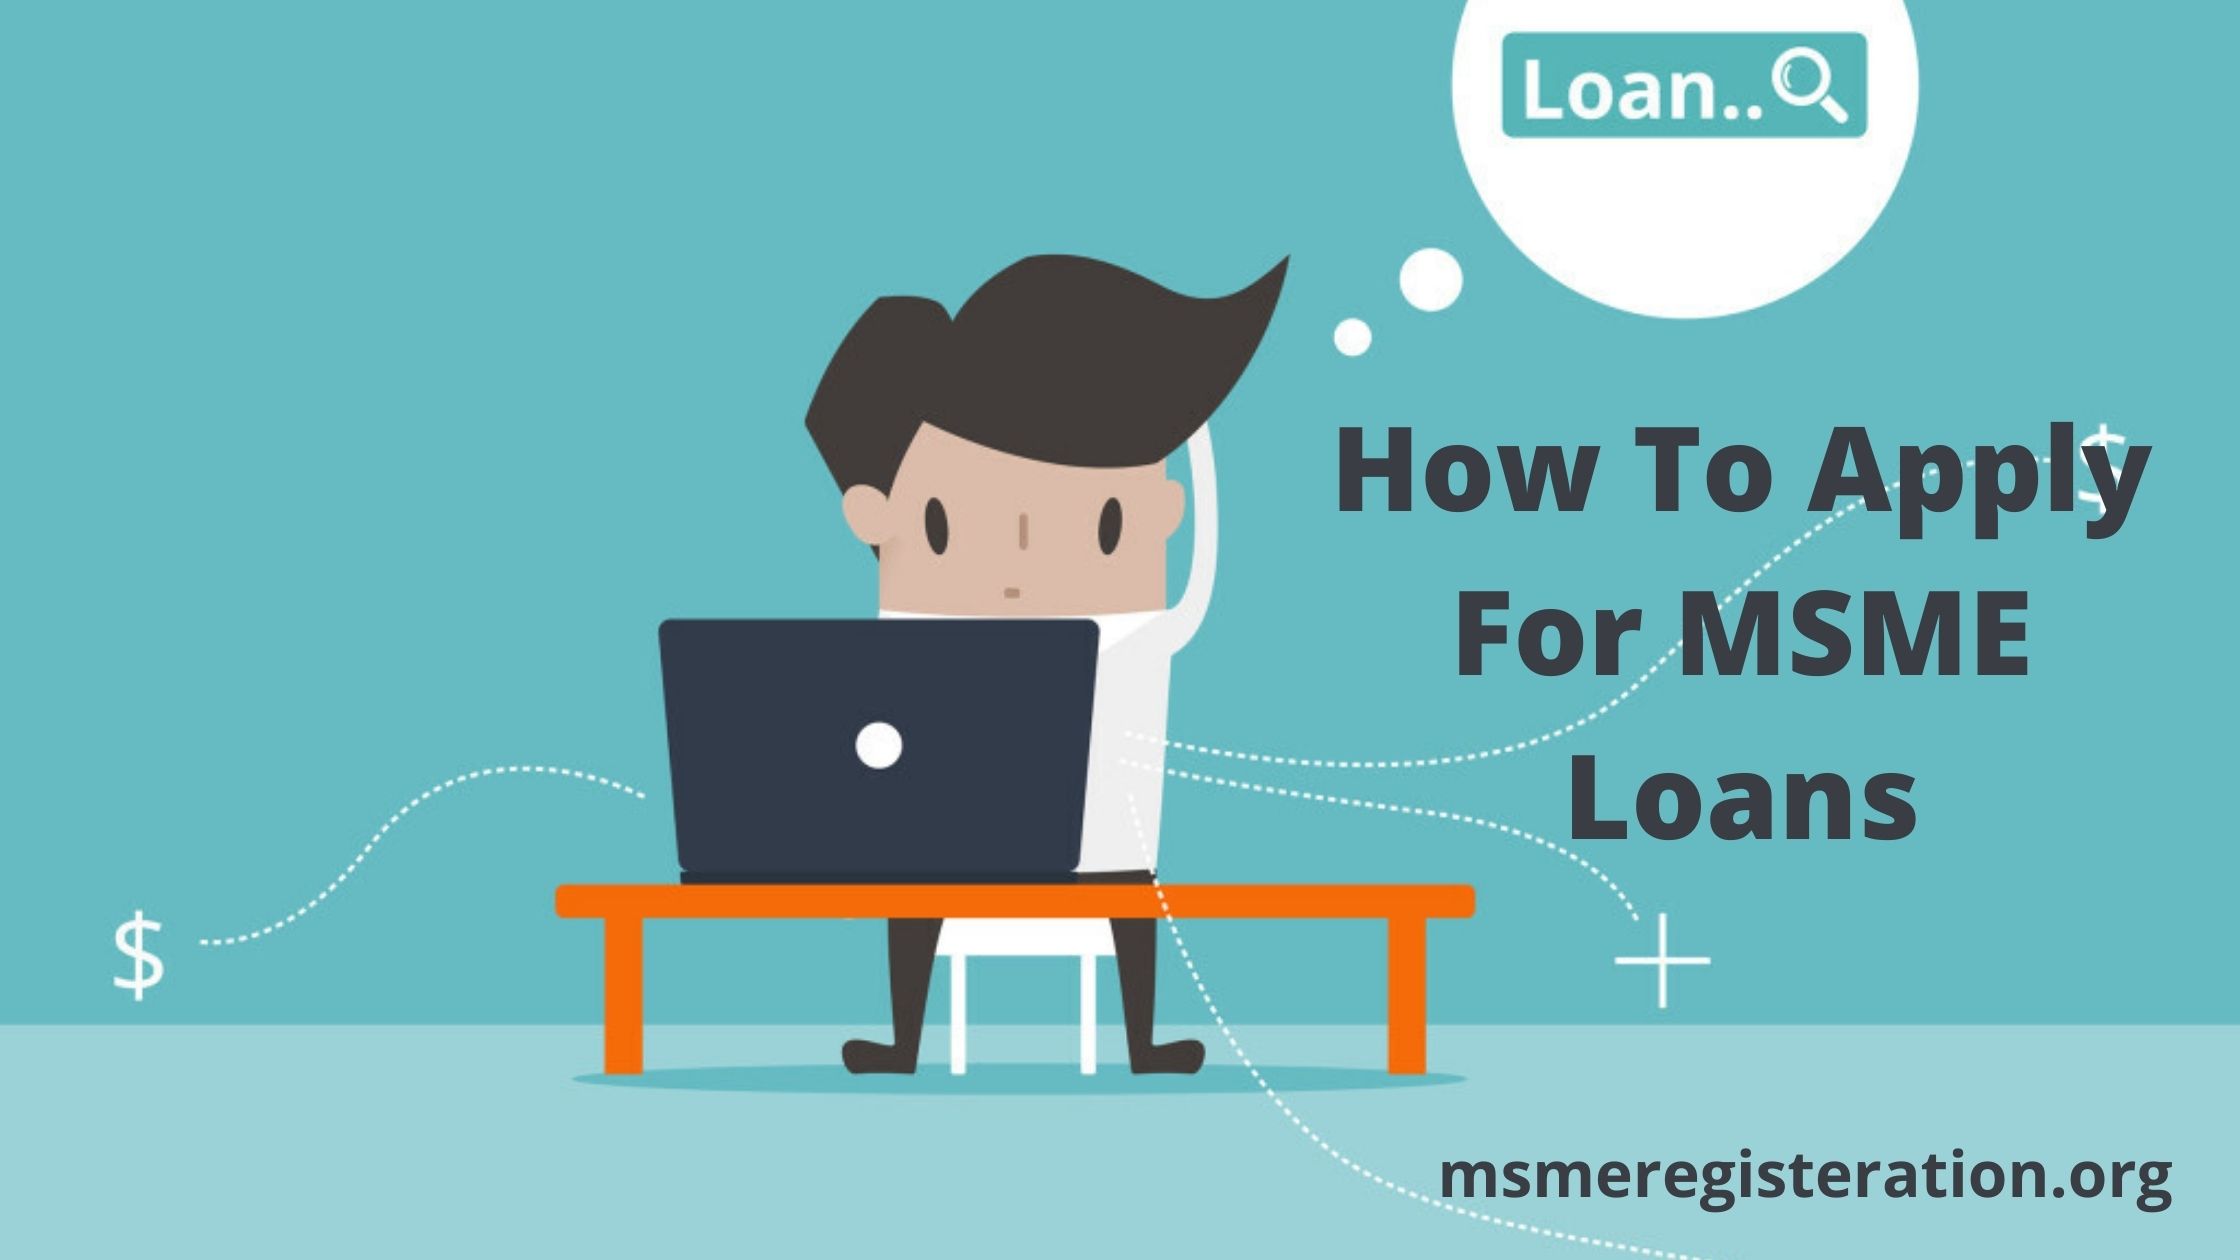 How To Apply For MSME Loans